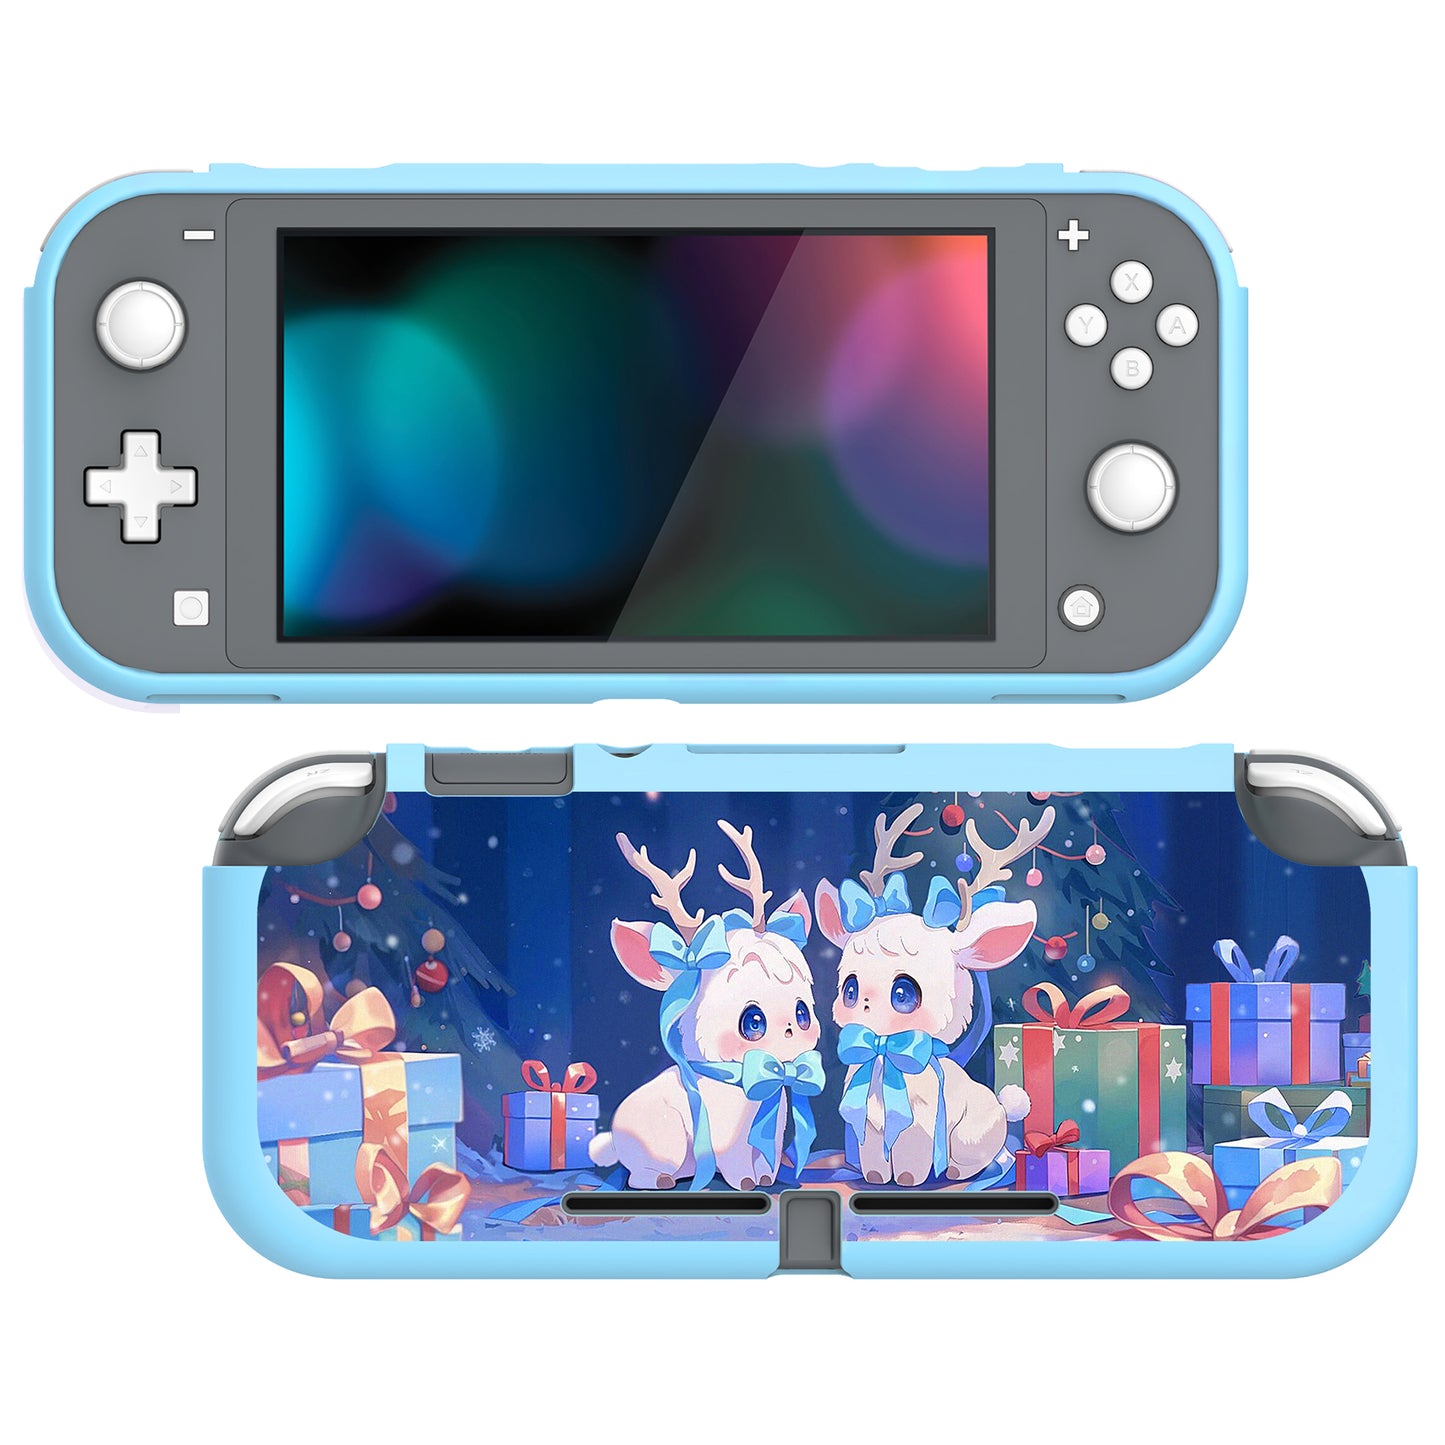 PlayVital Santa Deer Custom Protective Case for NS Switch Lite, Soft TPU Slim Case Cover for NS Switch Lite - LTU6030 PlayVital